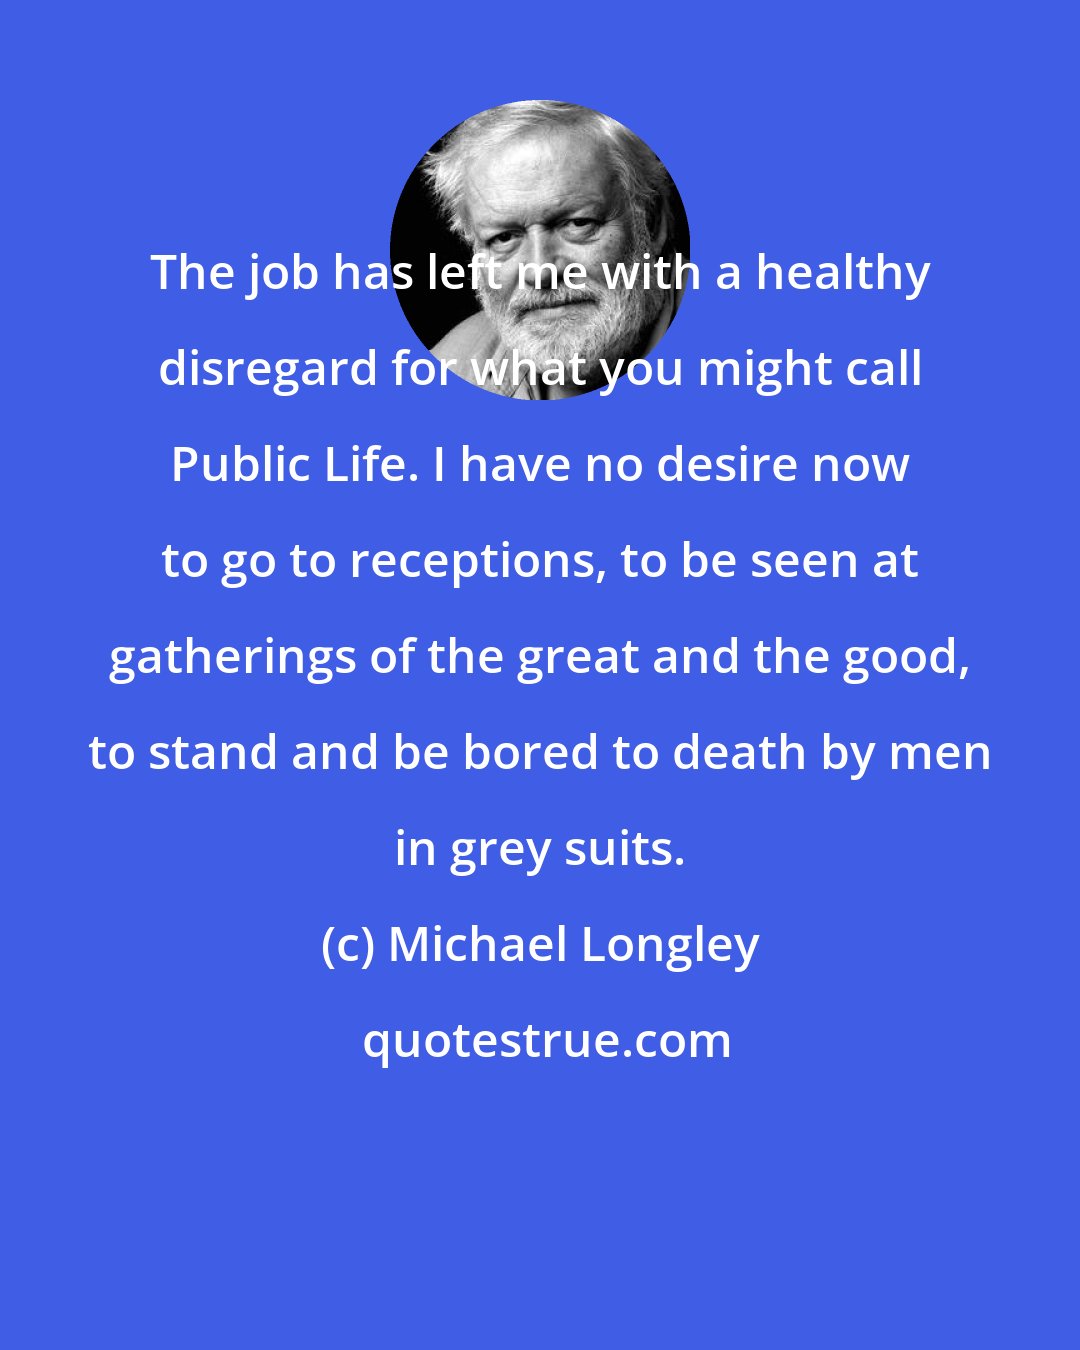 Michael Longley: The job has left me with a healthy disregard for what you might call Public Life. I have no desire now to go to receptions, to be seen at gatherings of the great and the good, to stand and be bored to death by men in grey suits.